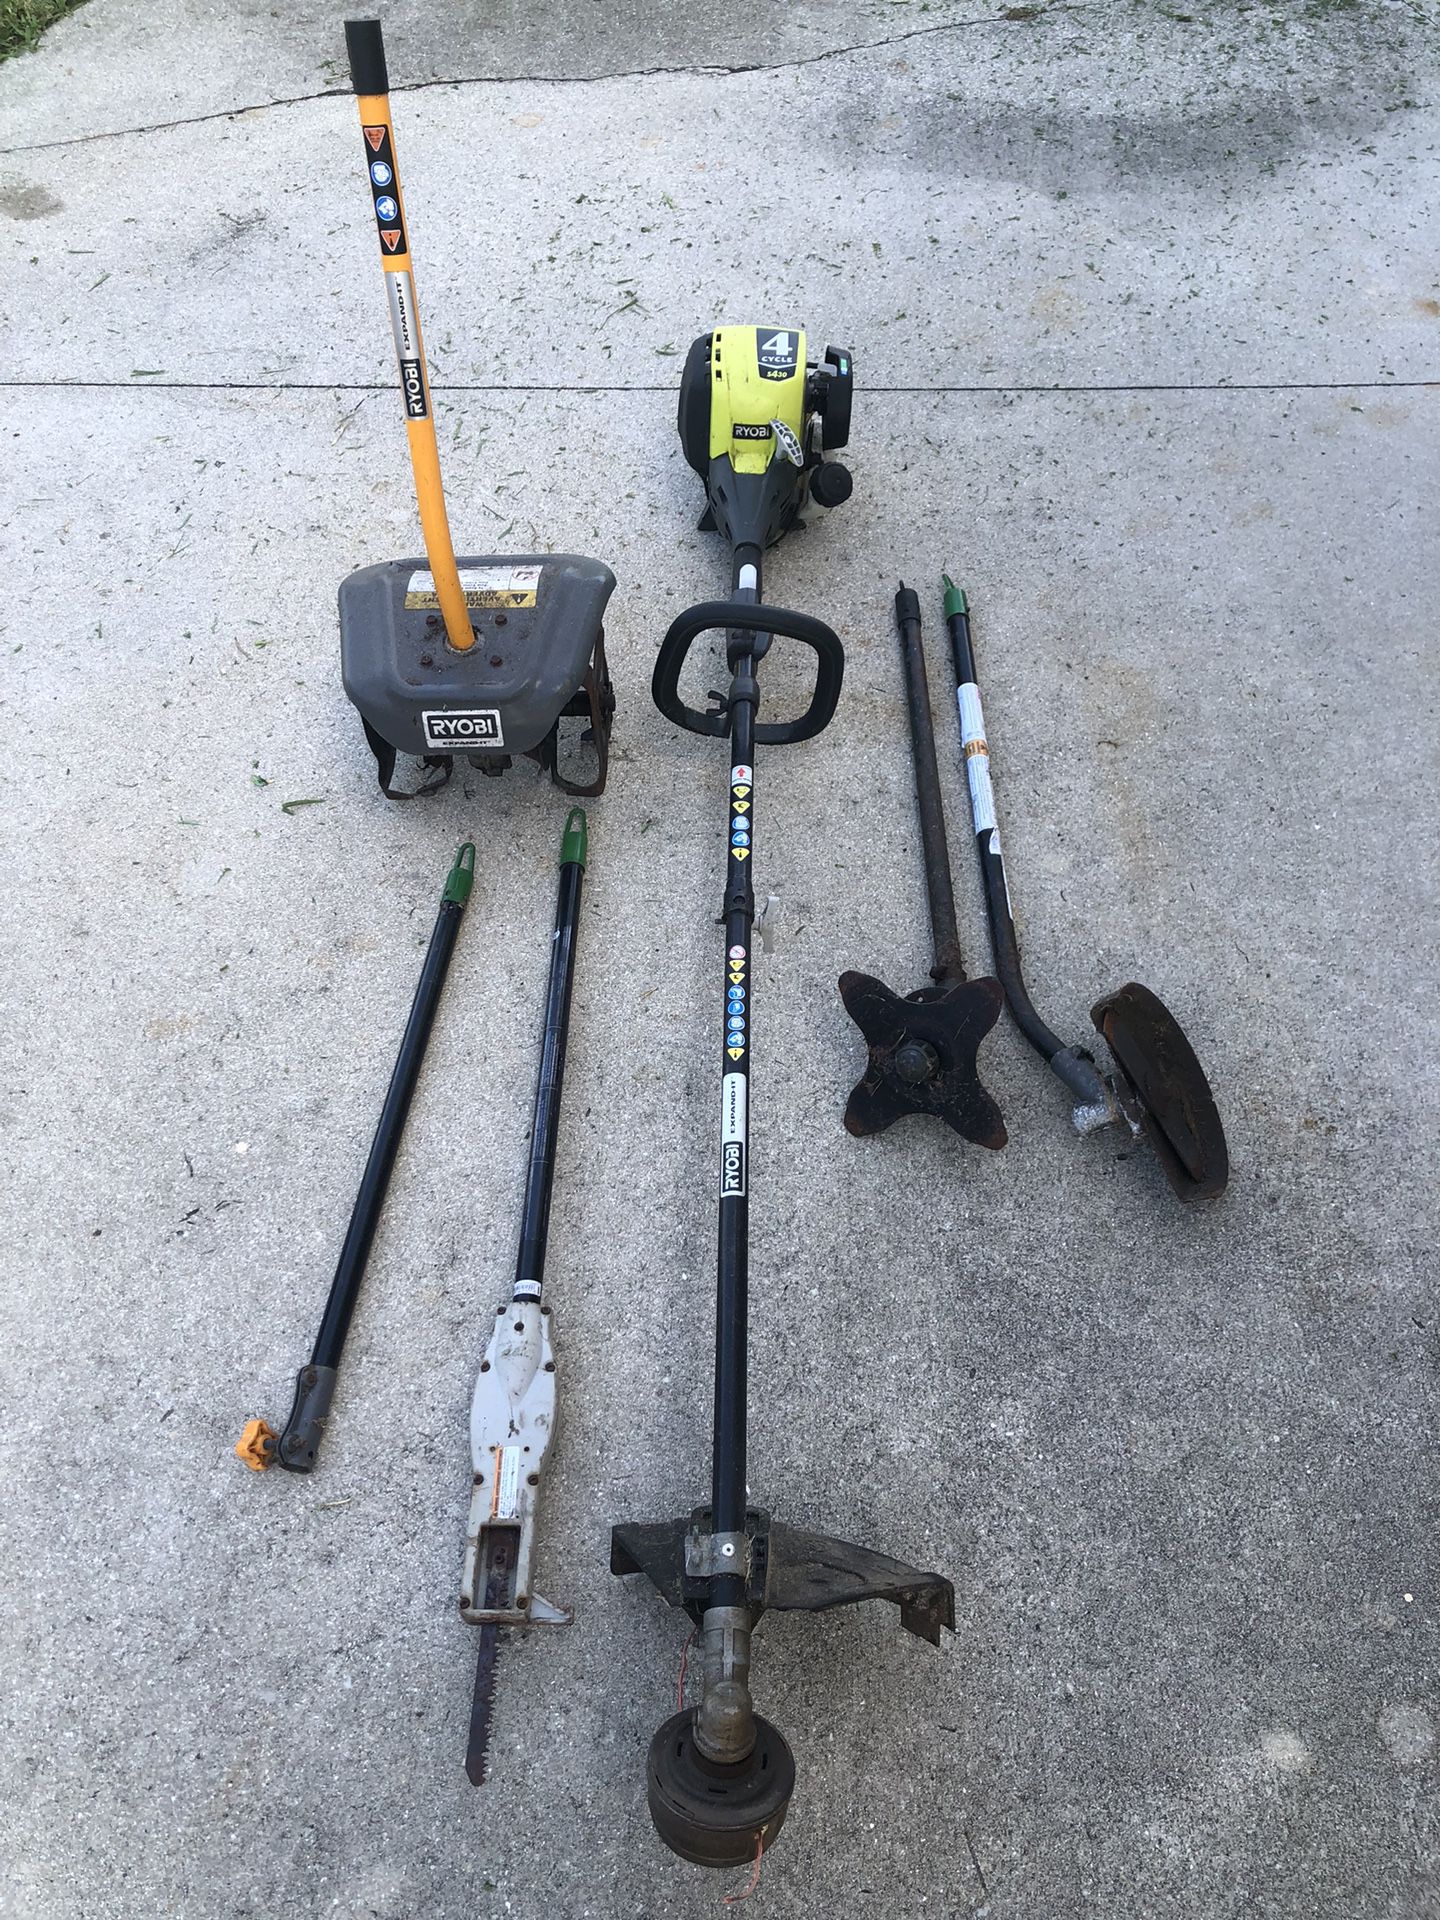 Trimmer With Attachments for Sale in Miromar Lakes, FL - OfferUp